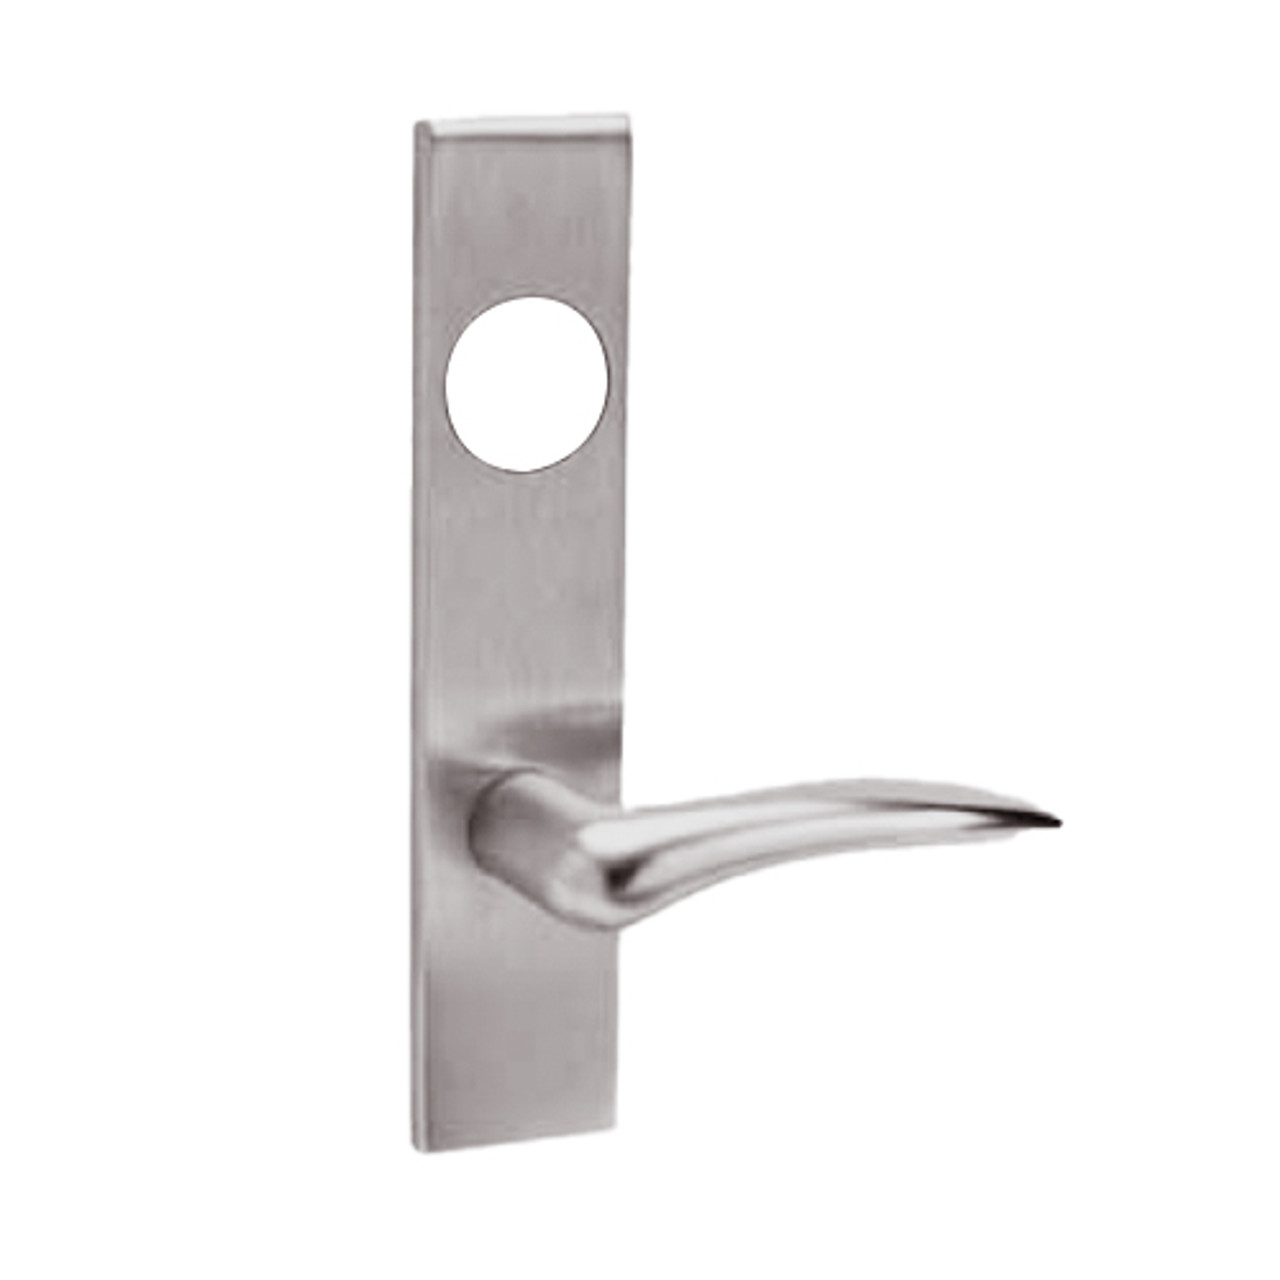 ML2067-DSR-630-LC-LH Corbin Russwin ML2000 Series Mortise Apartment Locksets with Dirke Lever in Satin Stainless